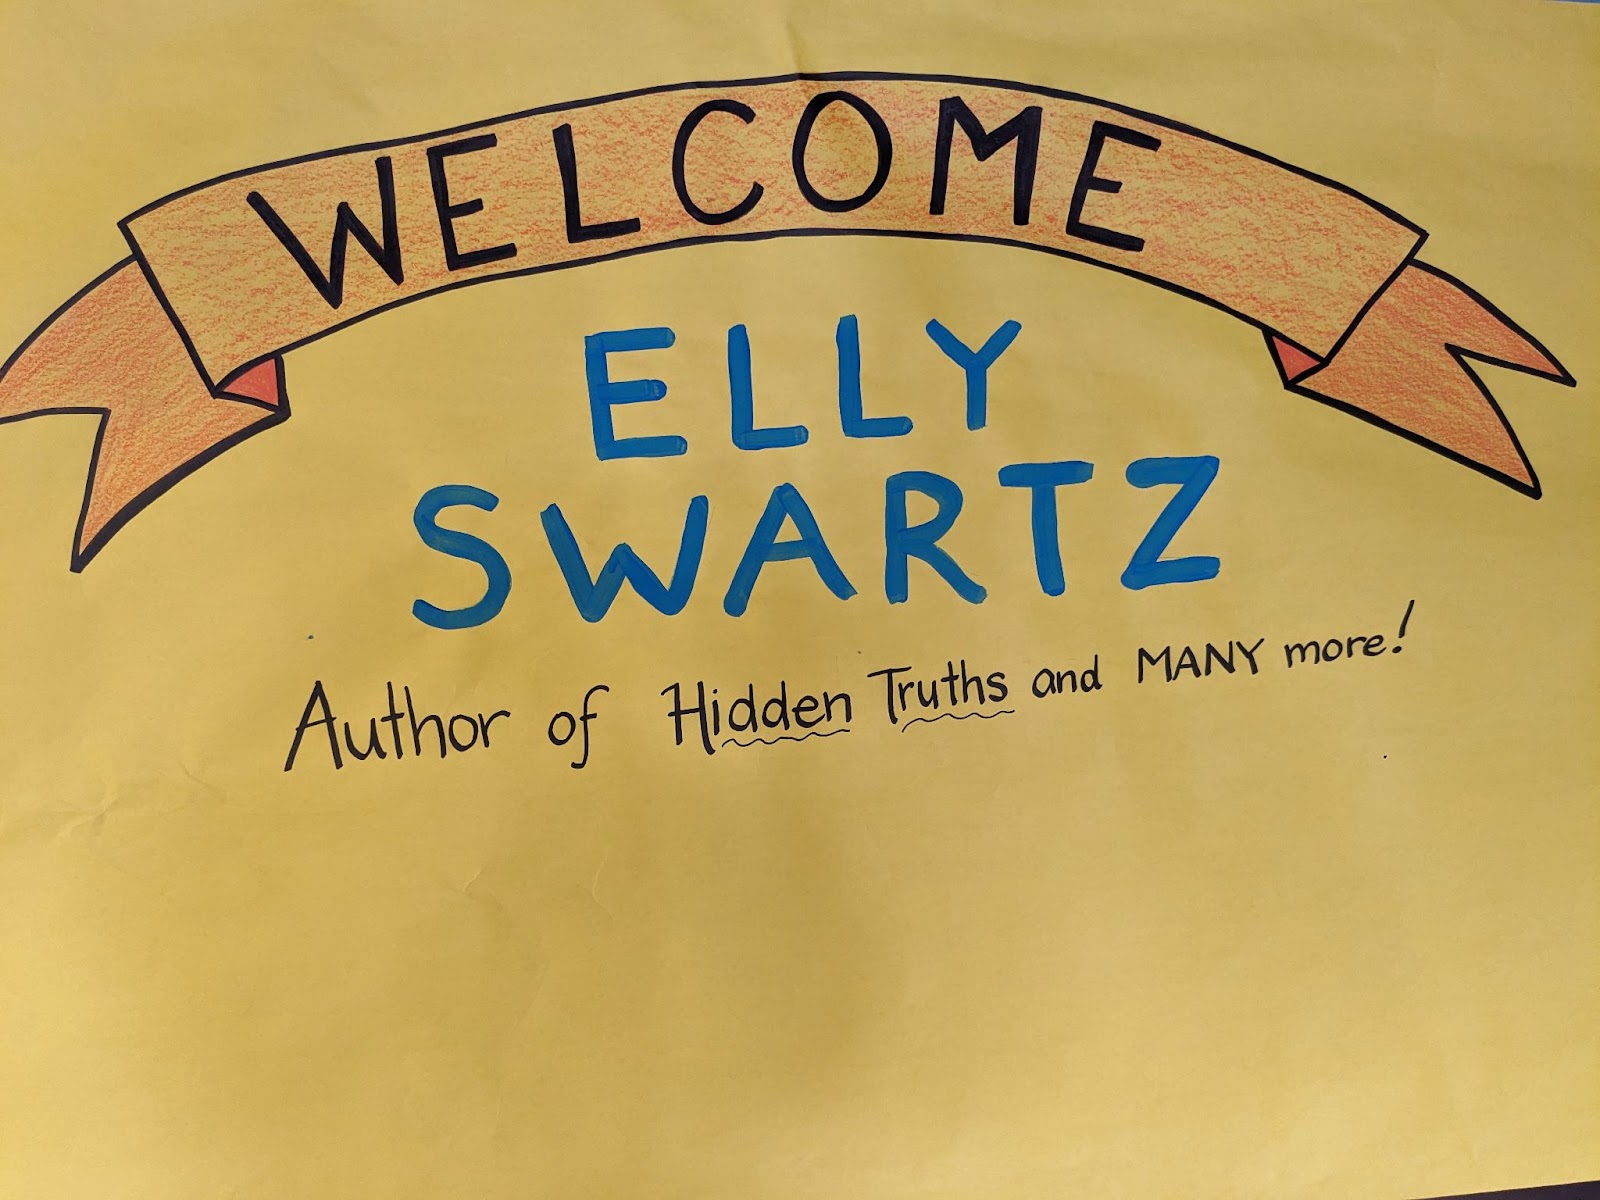 Poster made for our guest author Elly Swartz on yellow paper and blue writing.